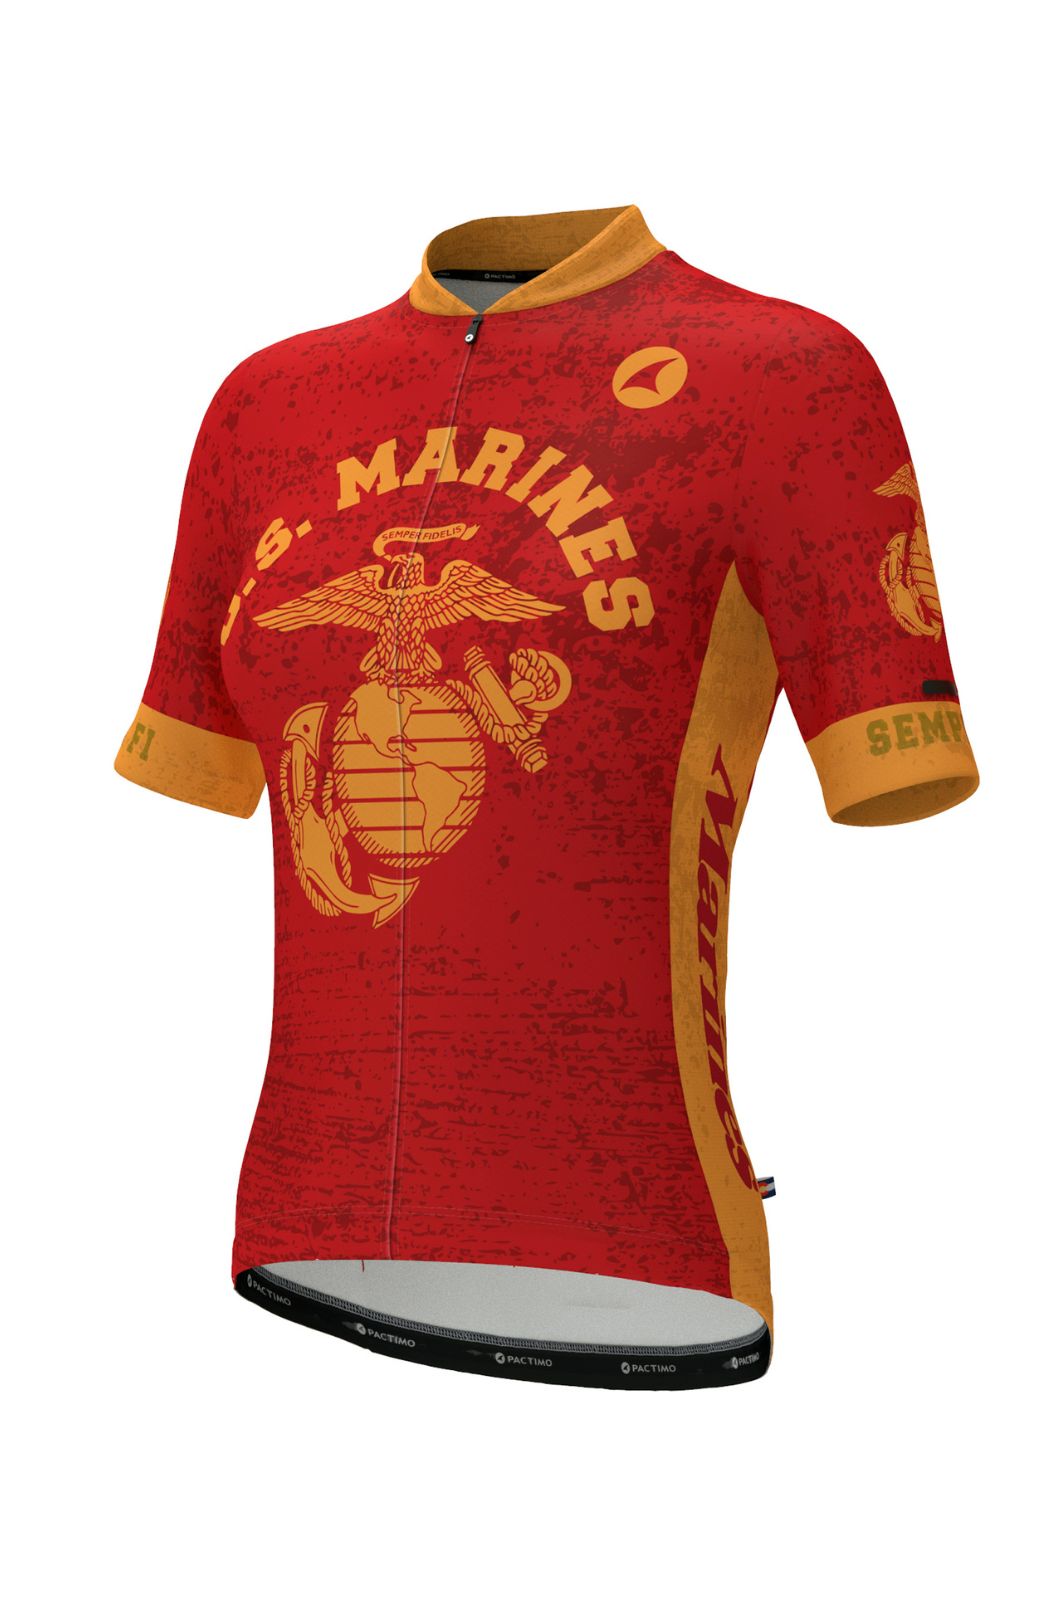 Women's US Marine Corps Cycling Jersey - Front View